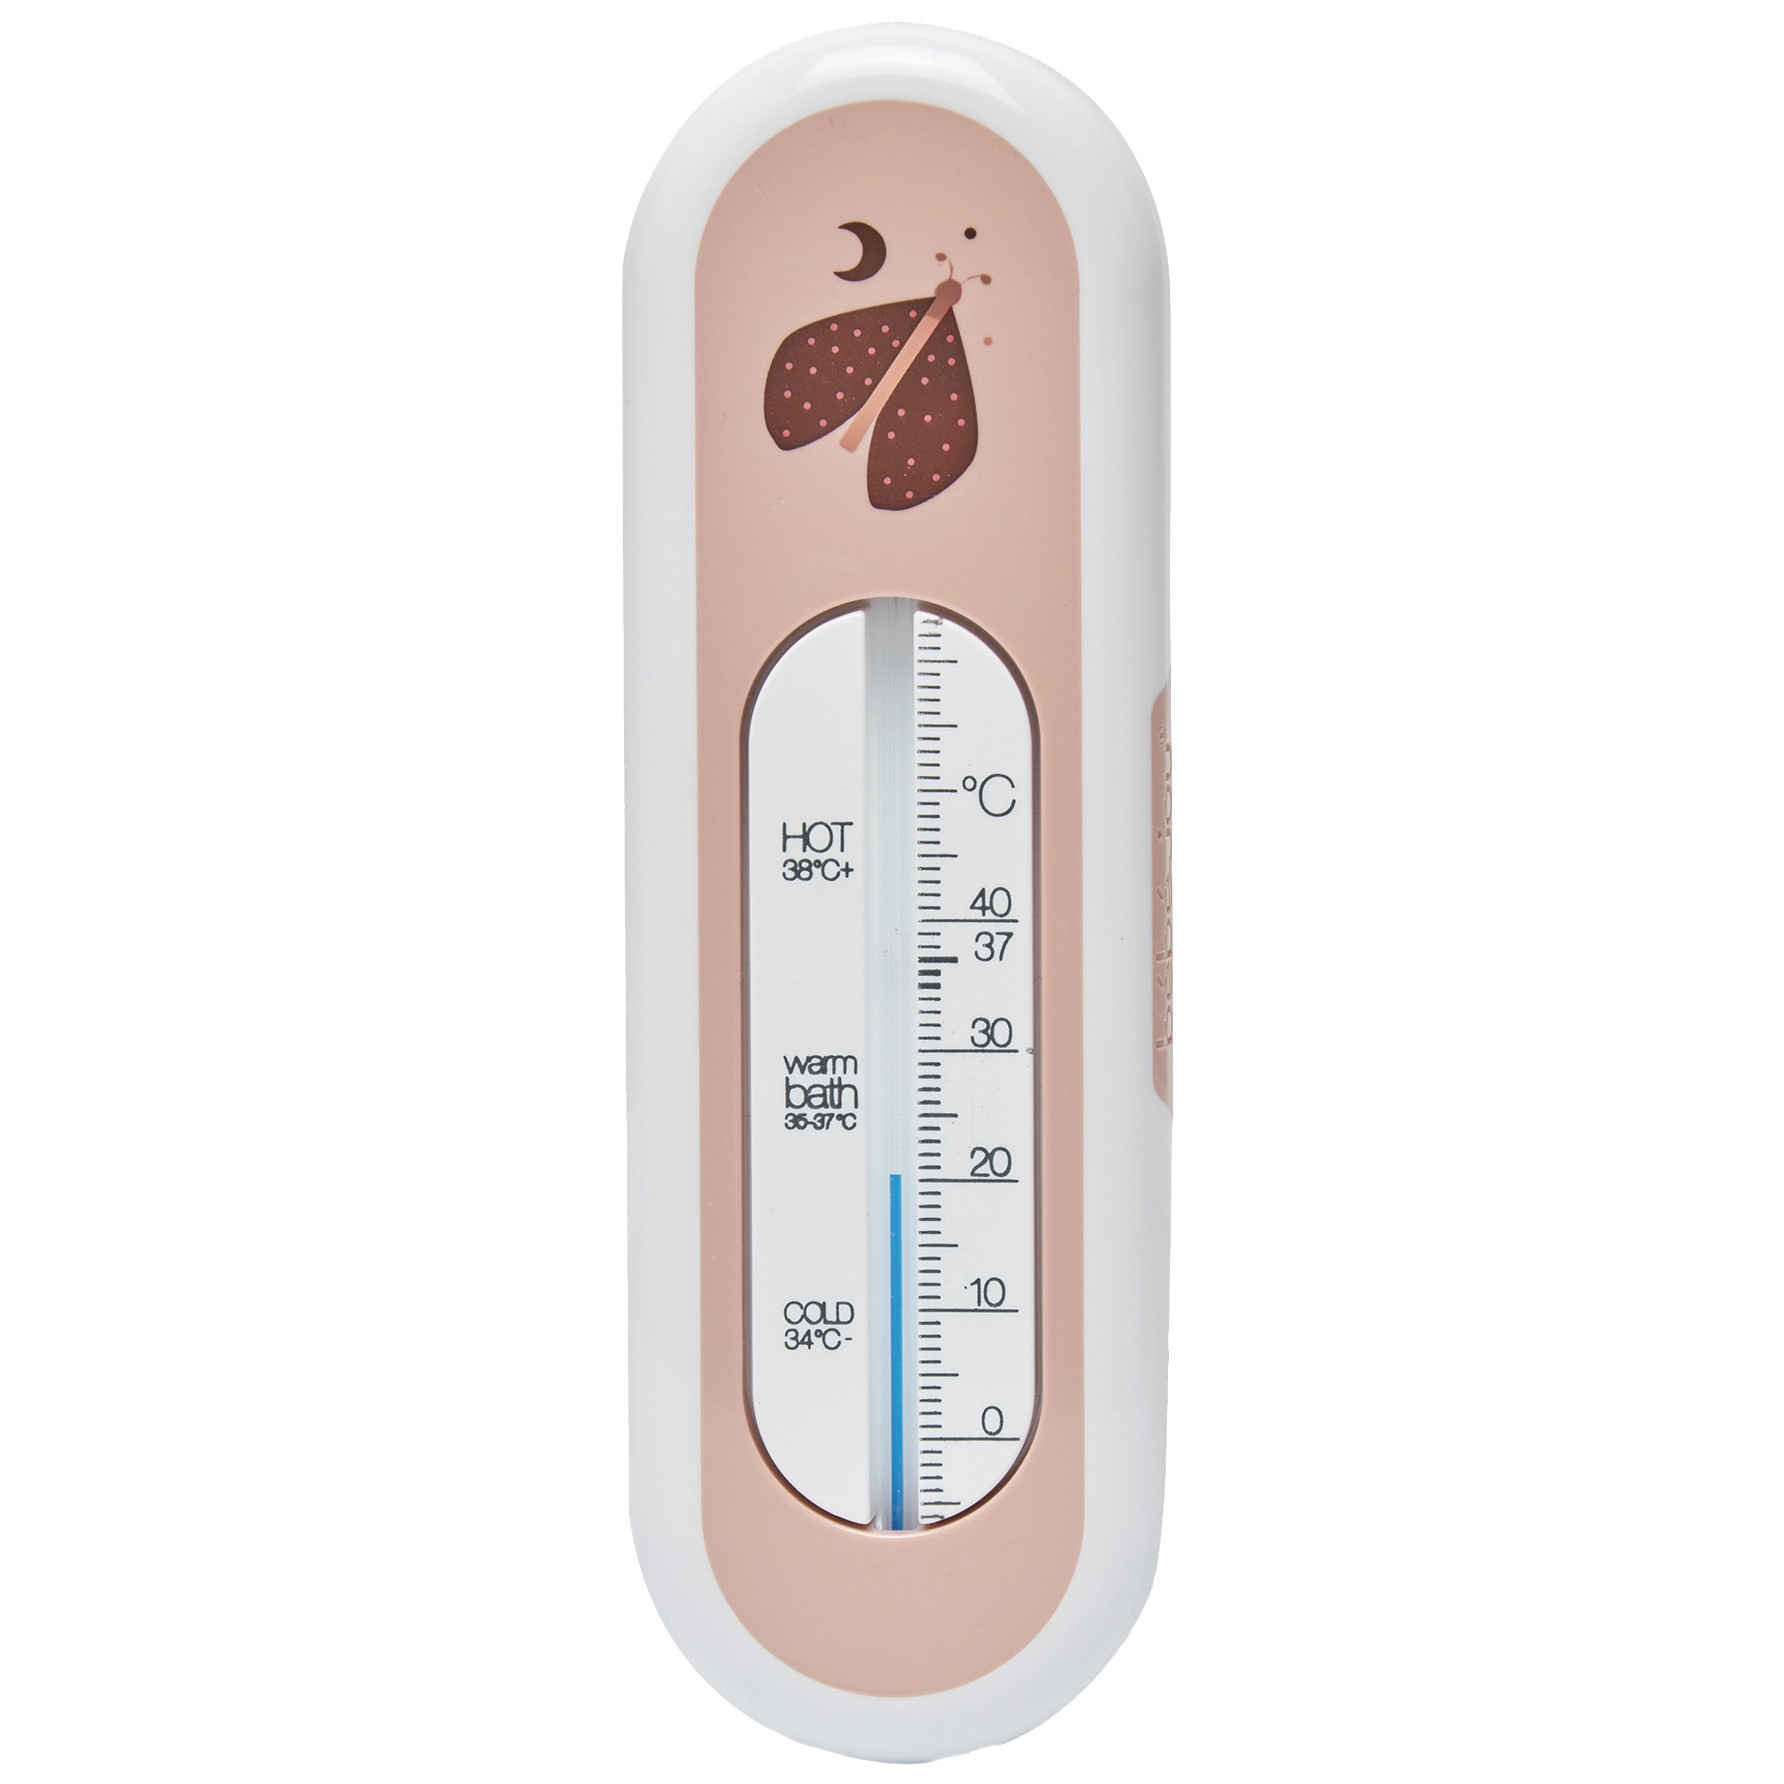 Badethermometer Sweet Butterfly 1